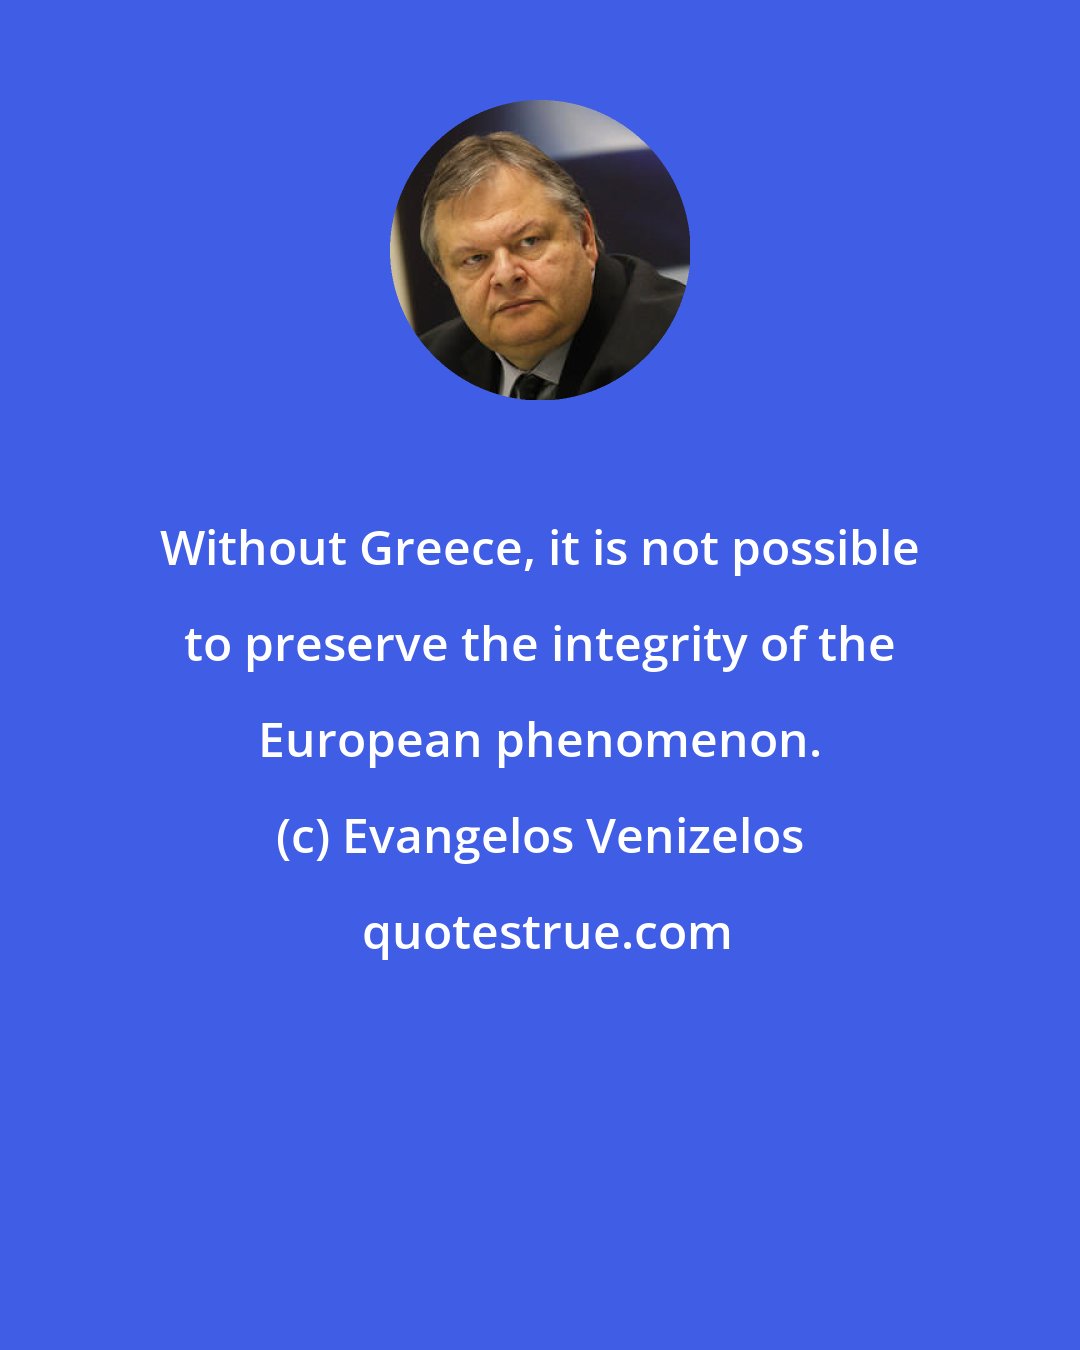 Evangelos Venizelos: Without Greece, it is not possible to preserve the integrity of the European phenomenon.